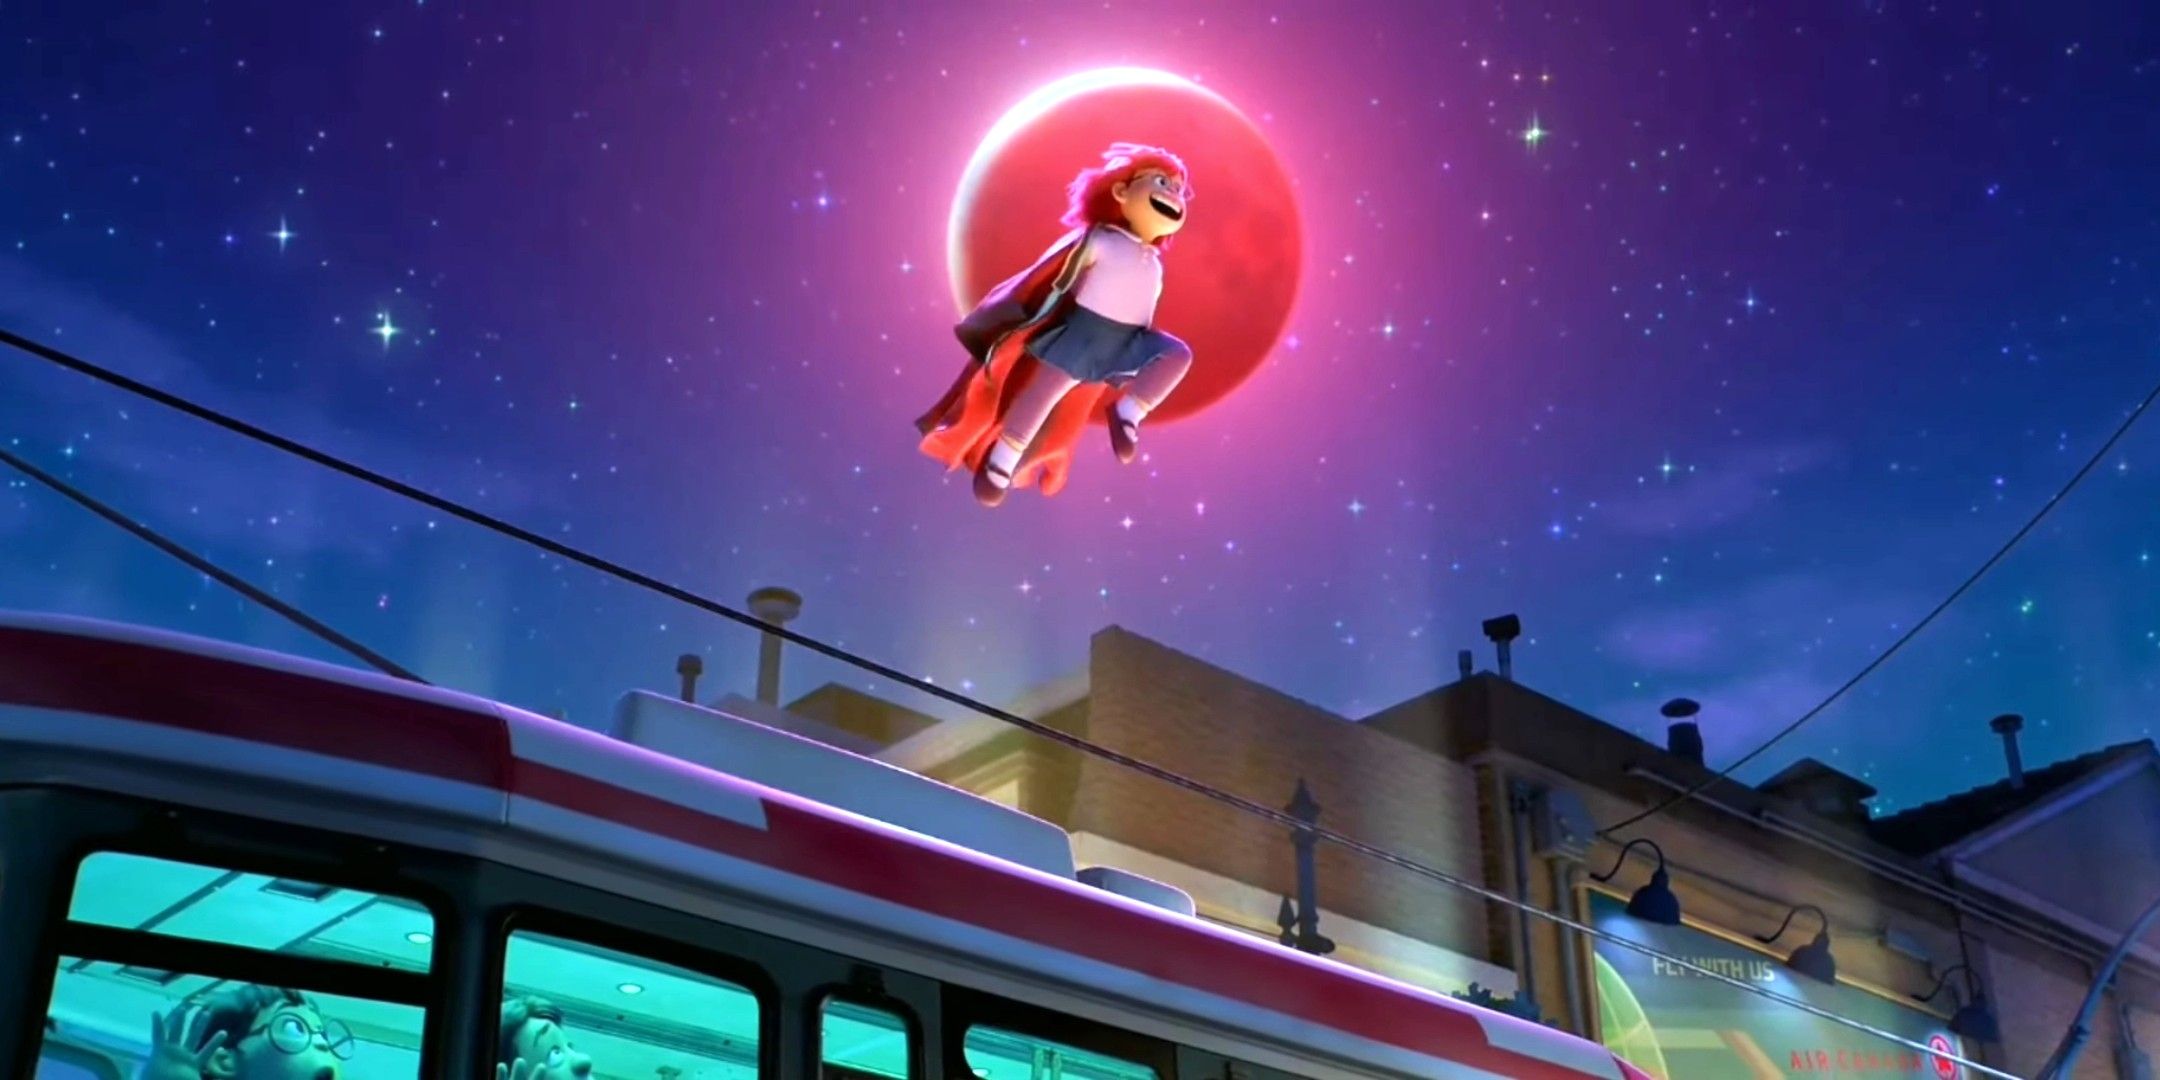 Mei flying through the sky crossing the red moon in Turning Red